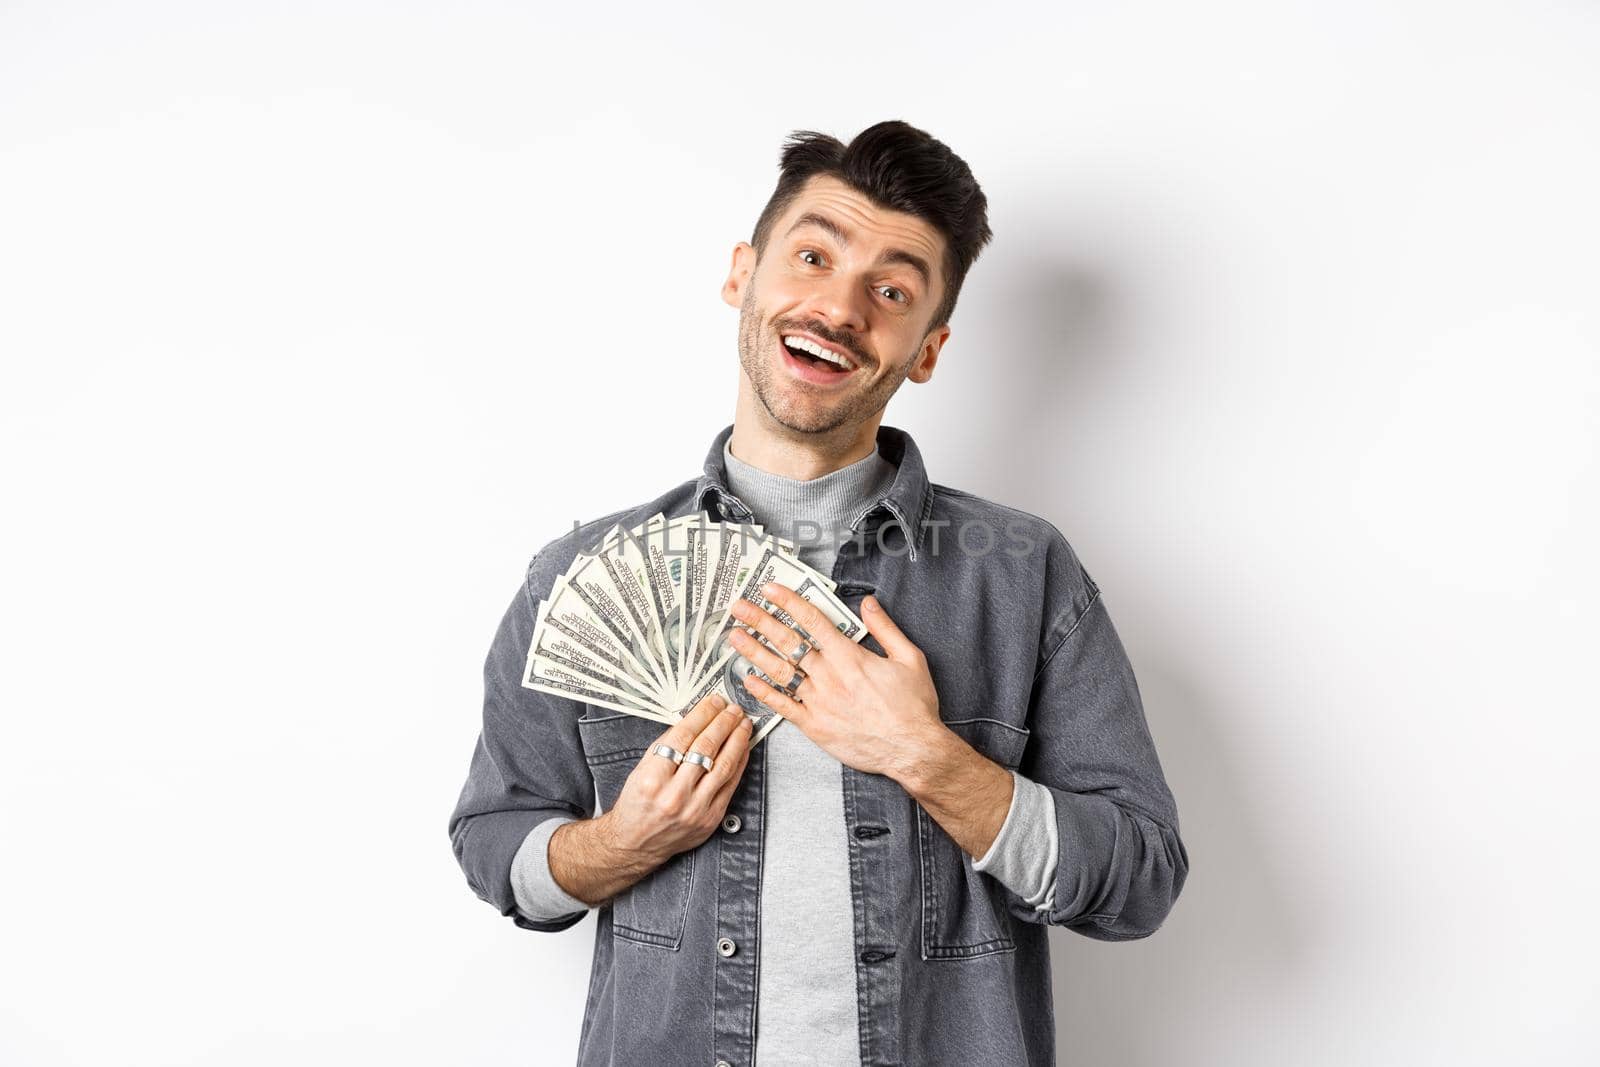 Happy smiling guy making money, hugging dollar bills with pleased relieved face, standing against white background.